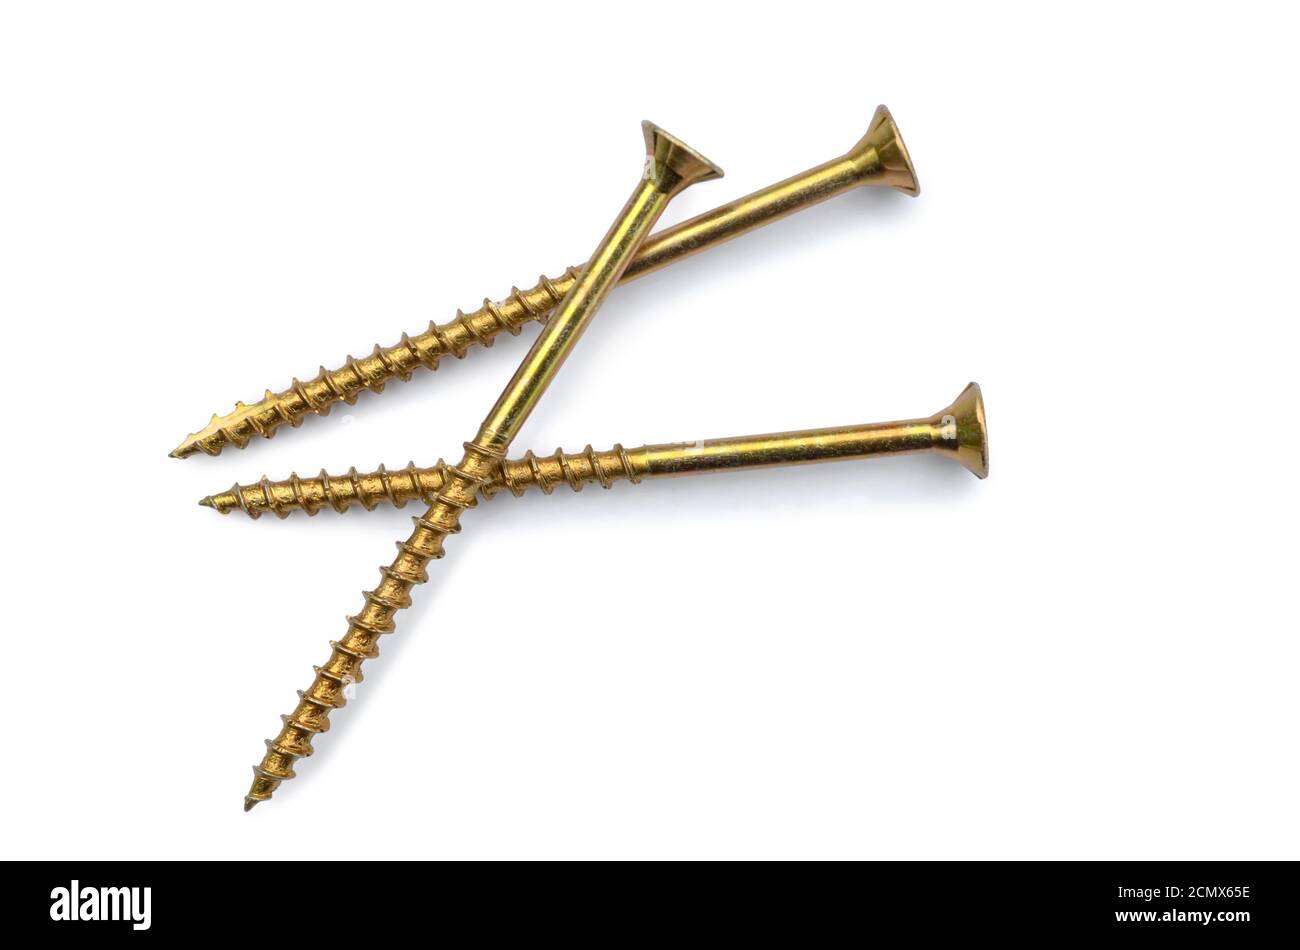 Golden tapping screws for construction Stock Photo